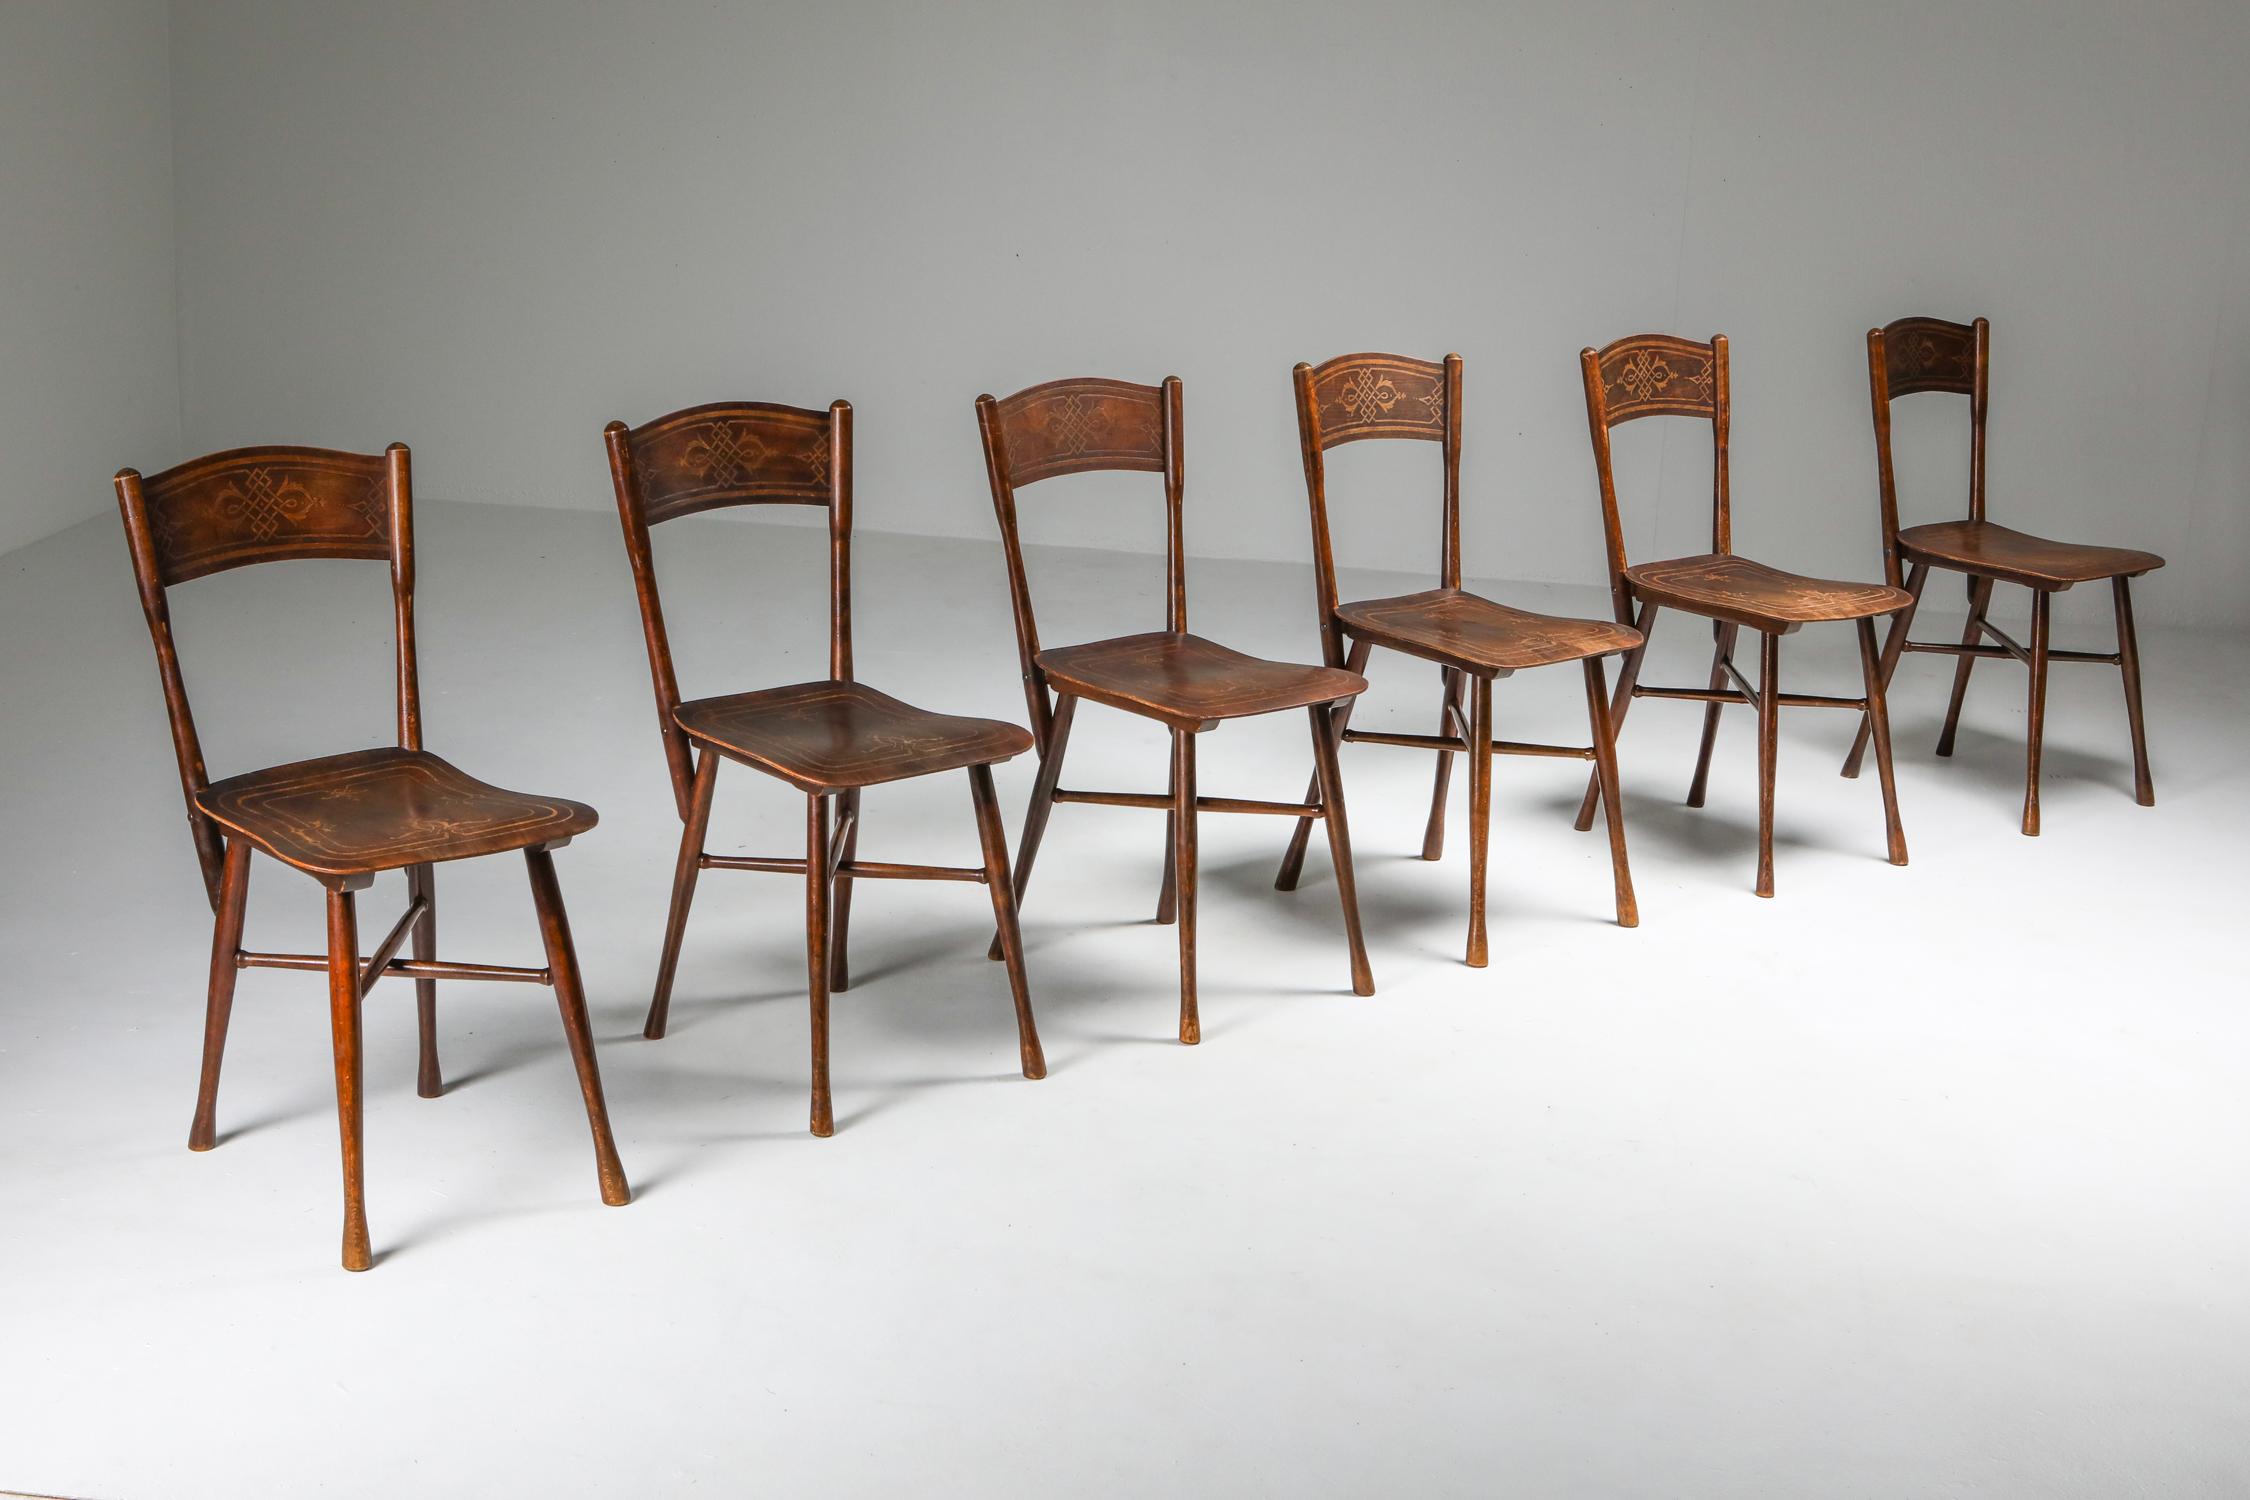 Bistro dining chair, set of six, JJ Kohn, Austria, 1900

Not a typical bentwood chair, but solid turned wood. 
The back rest connects straight down to the legs

Jacob & Josef Kohn, also known as J. & J. Kohn, was an Austrian furniture maker and